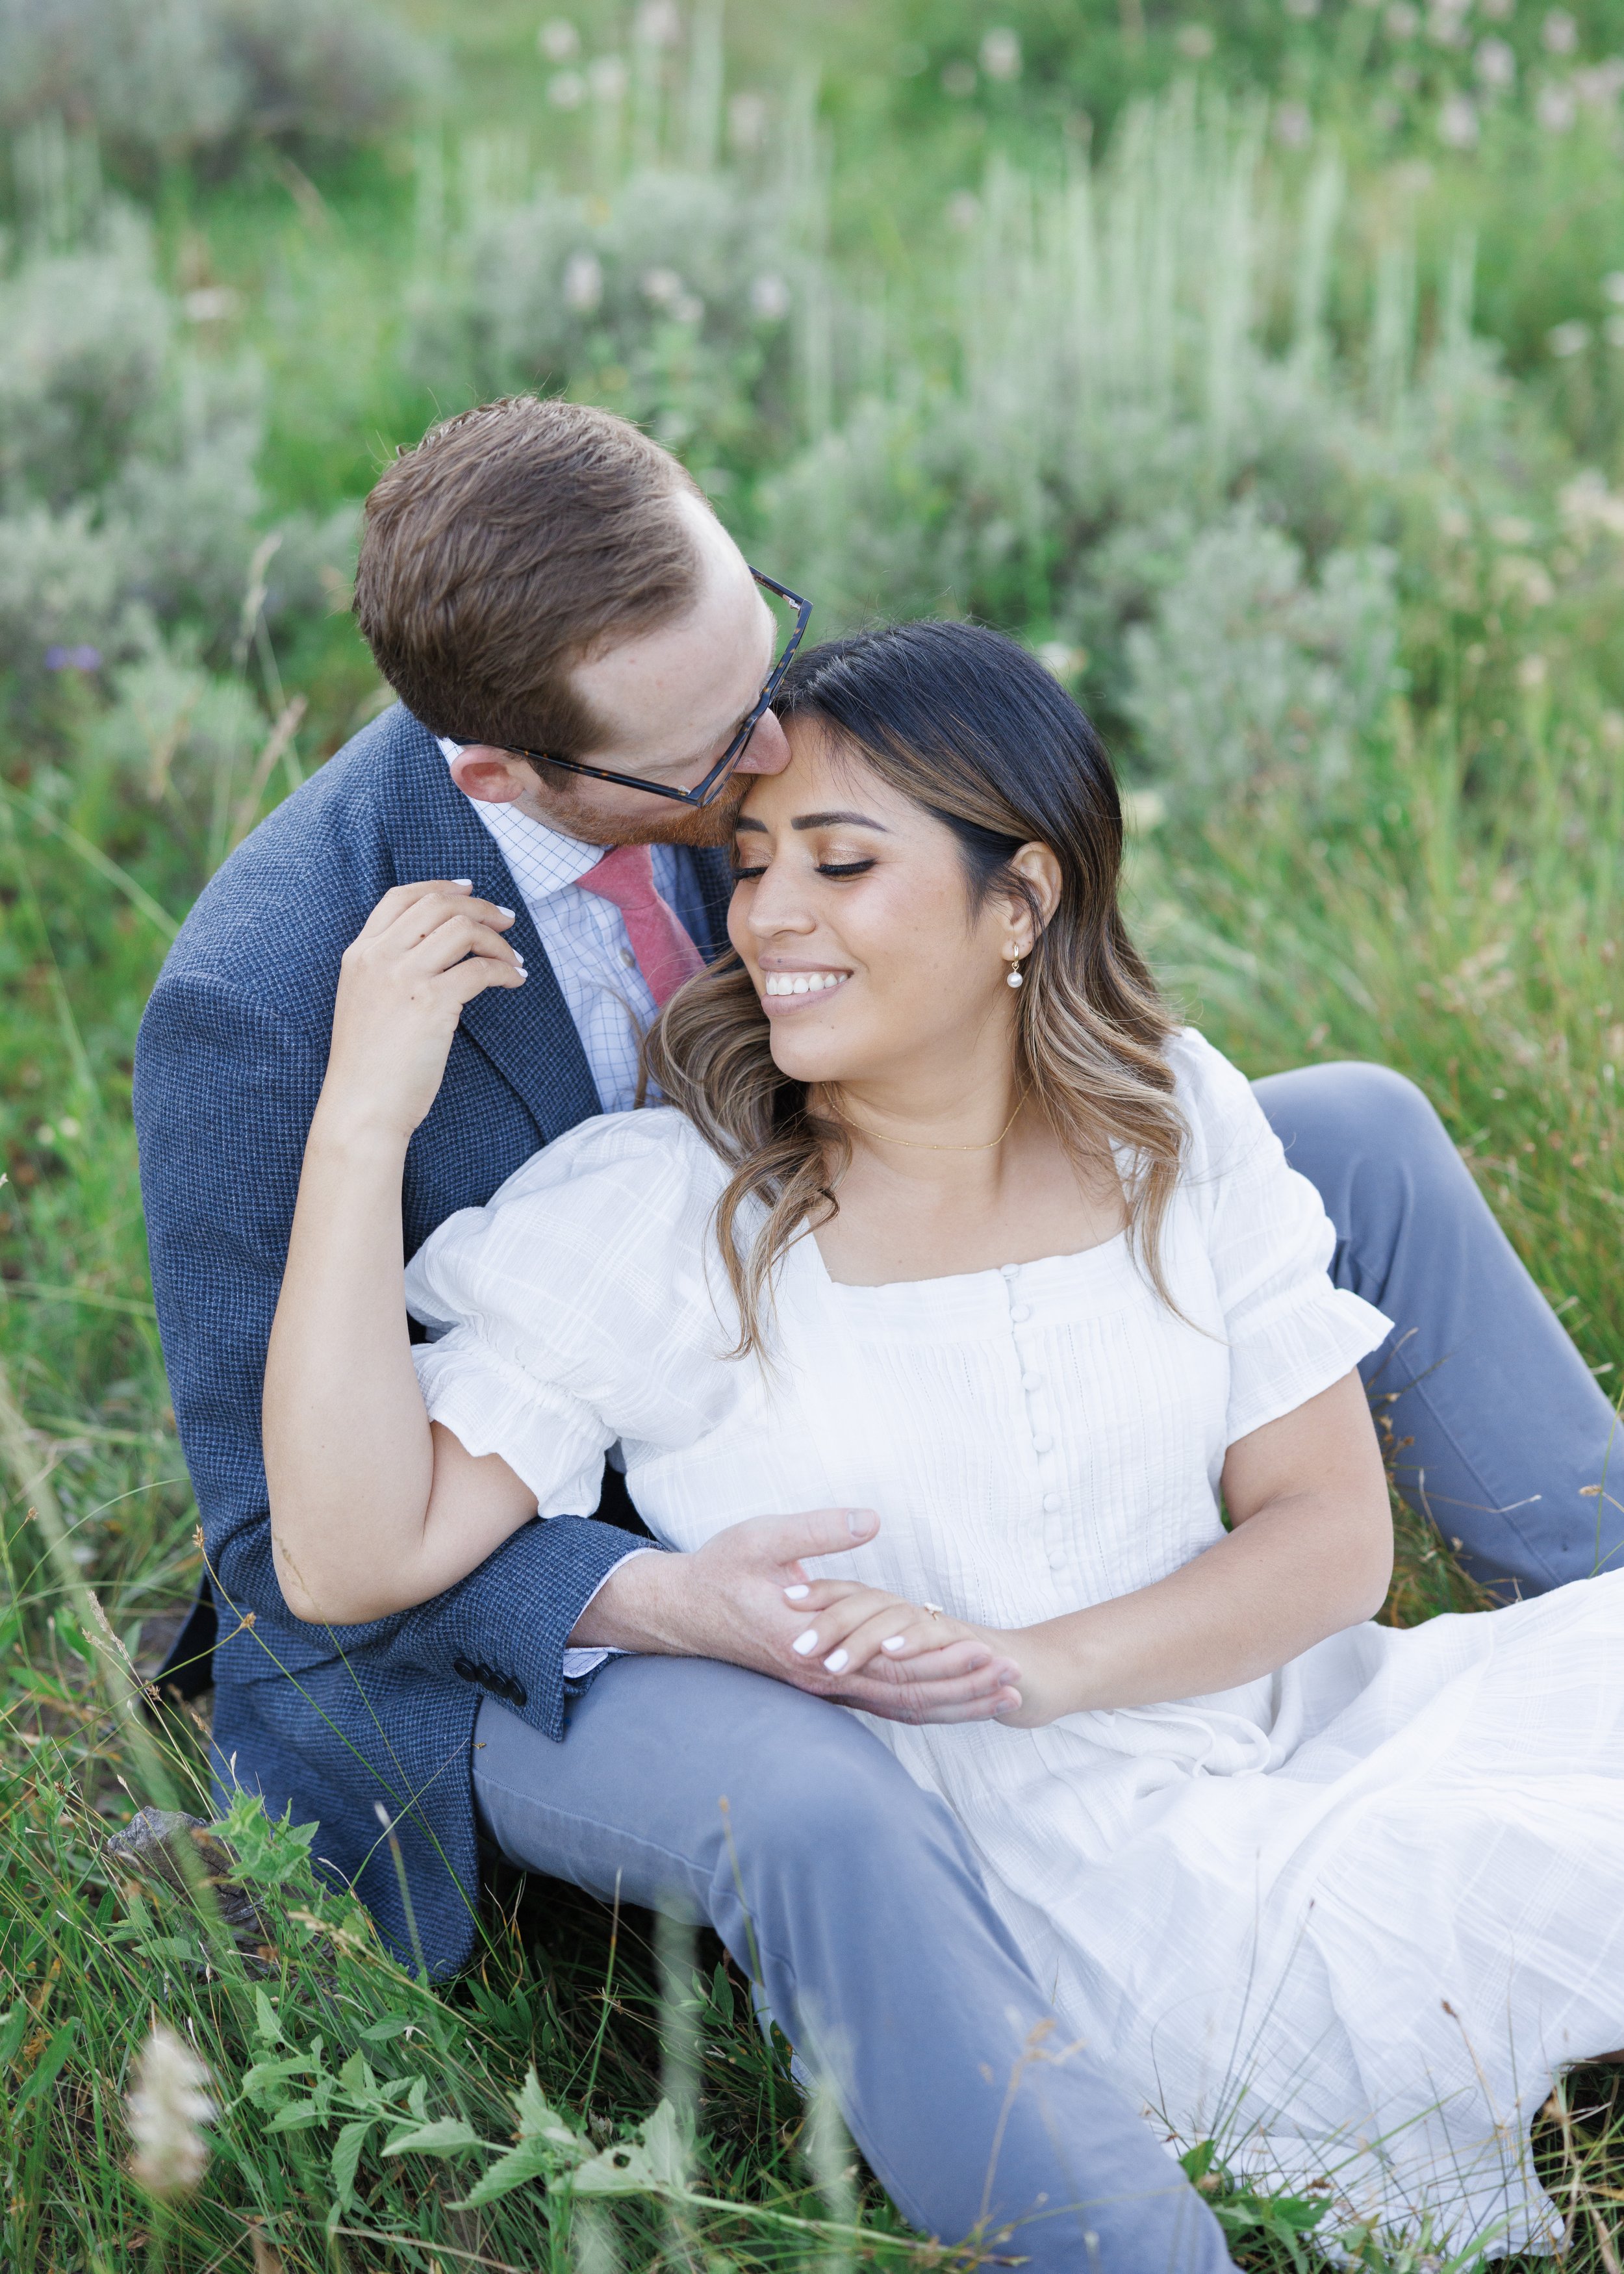  In a mountain meadow in Park City, a man kisses the top of a woman's head by Savanna Richardson Photography. white engagement dress meadow #ParkCityEngagements #ParkCityPhotographers #SavannaRichardsonPhotography #SavannaRichardsonEngagements   